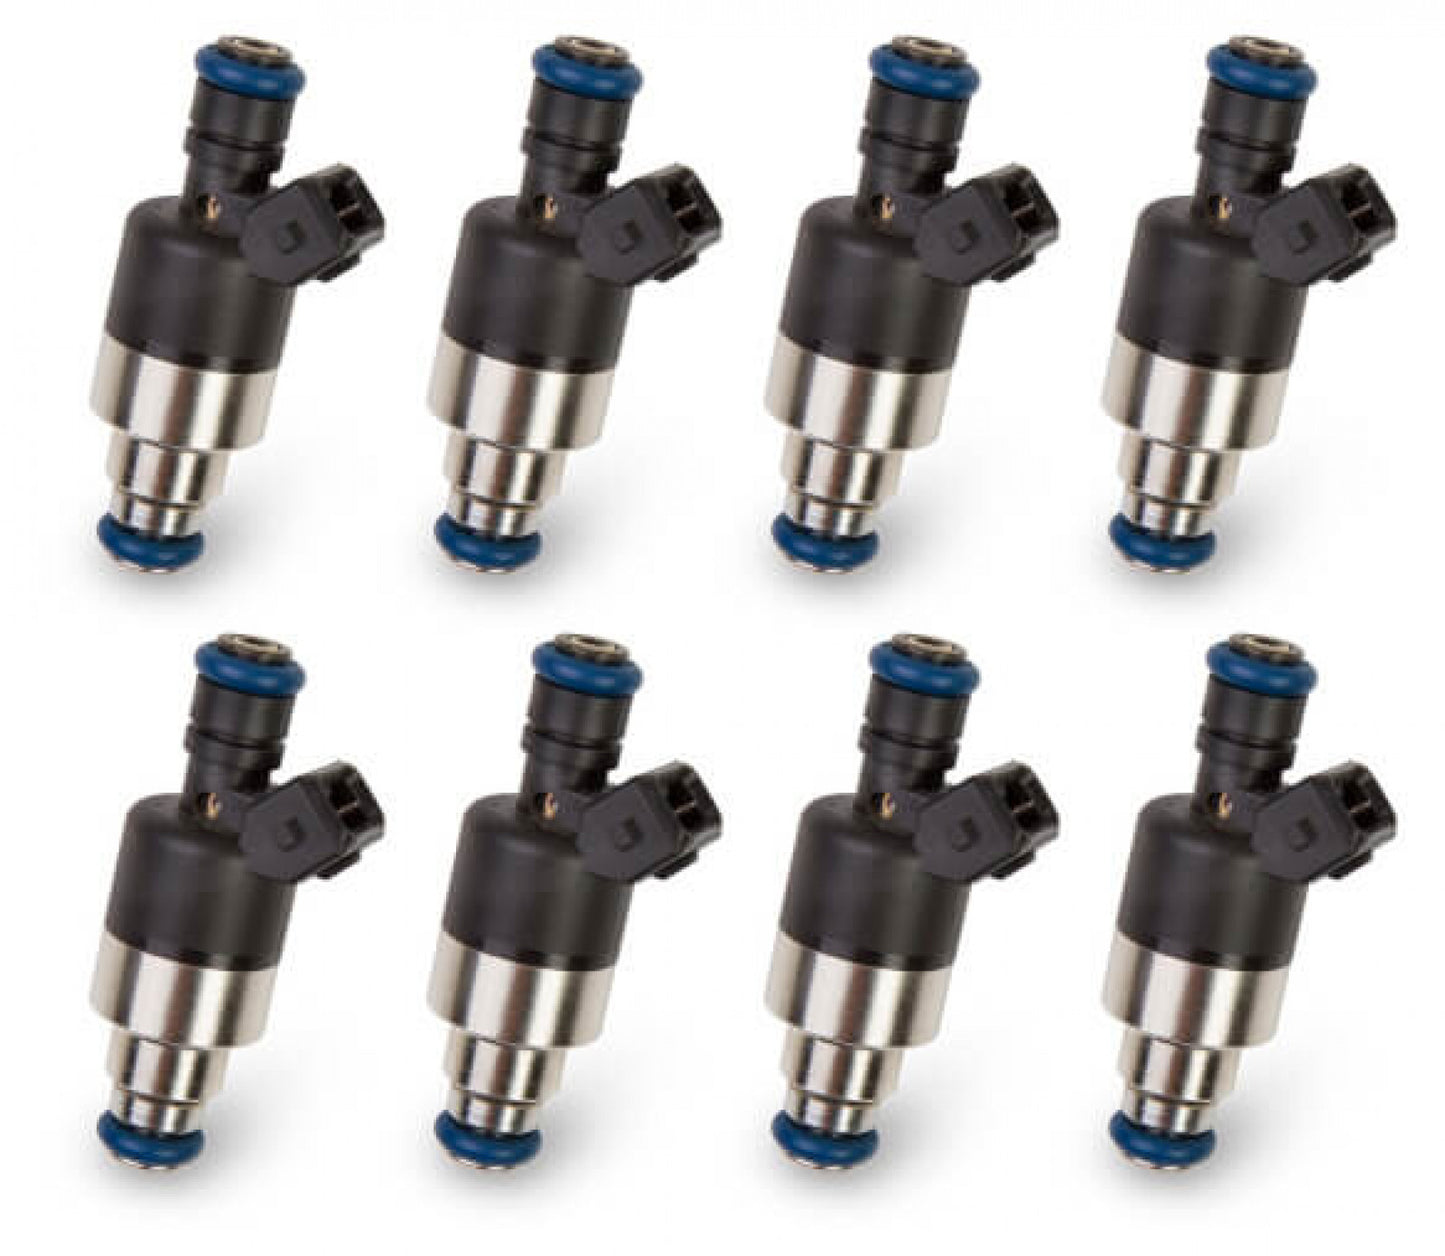 Holley EFI Performance Fuel Injectors - Set of Eight 522-428